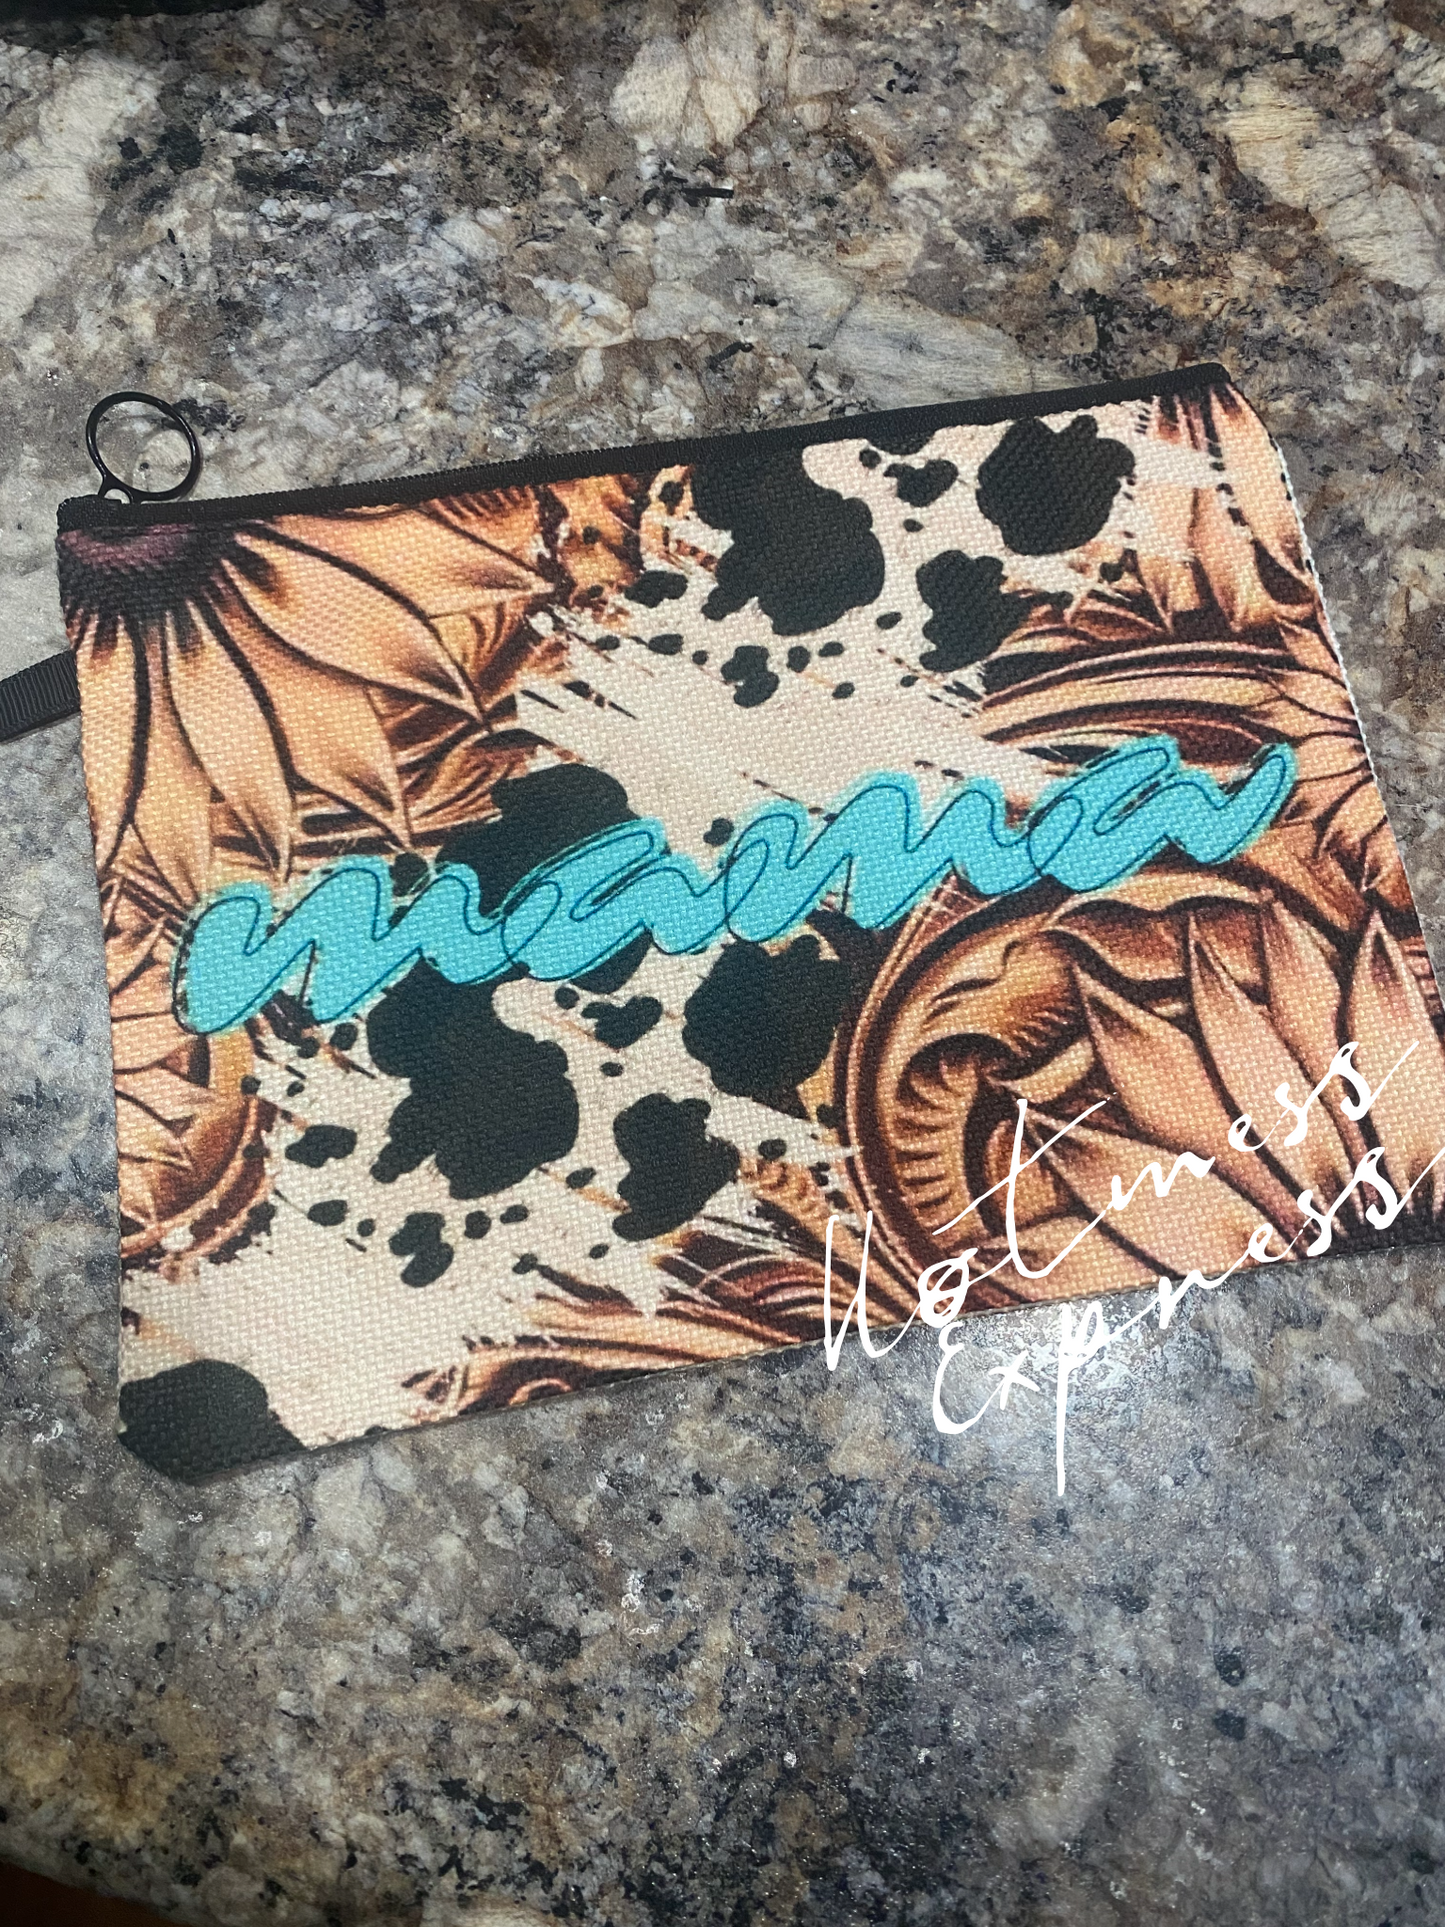 Mama Makeup Pouch